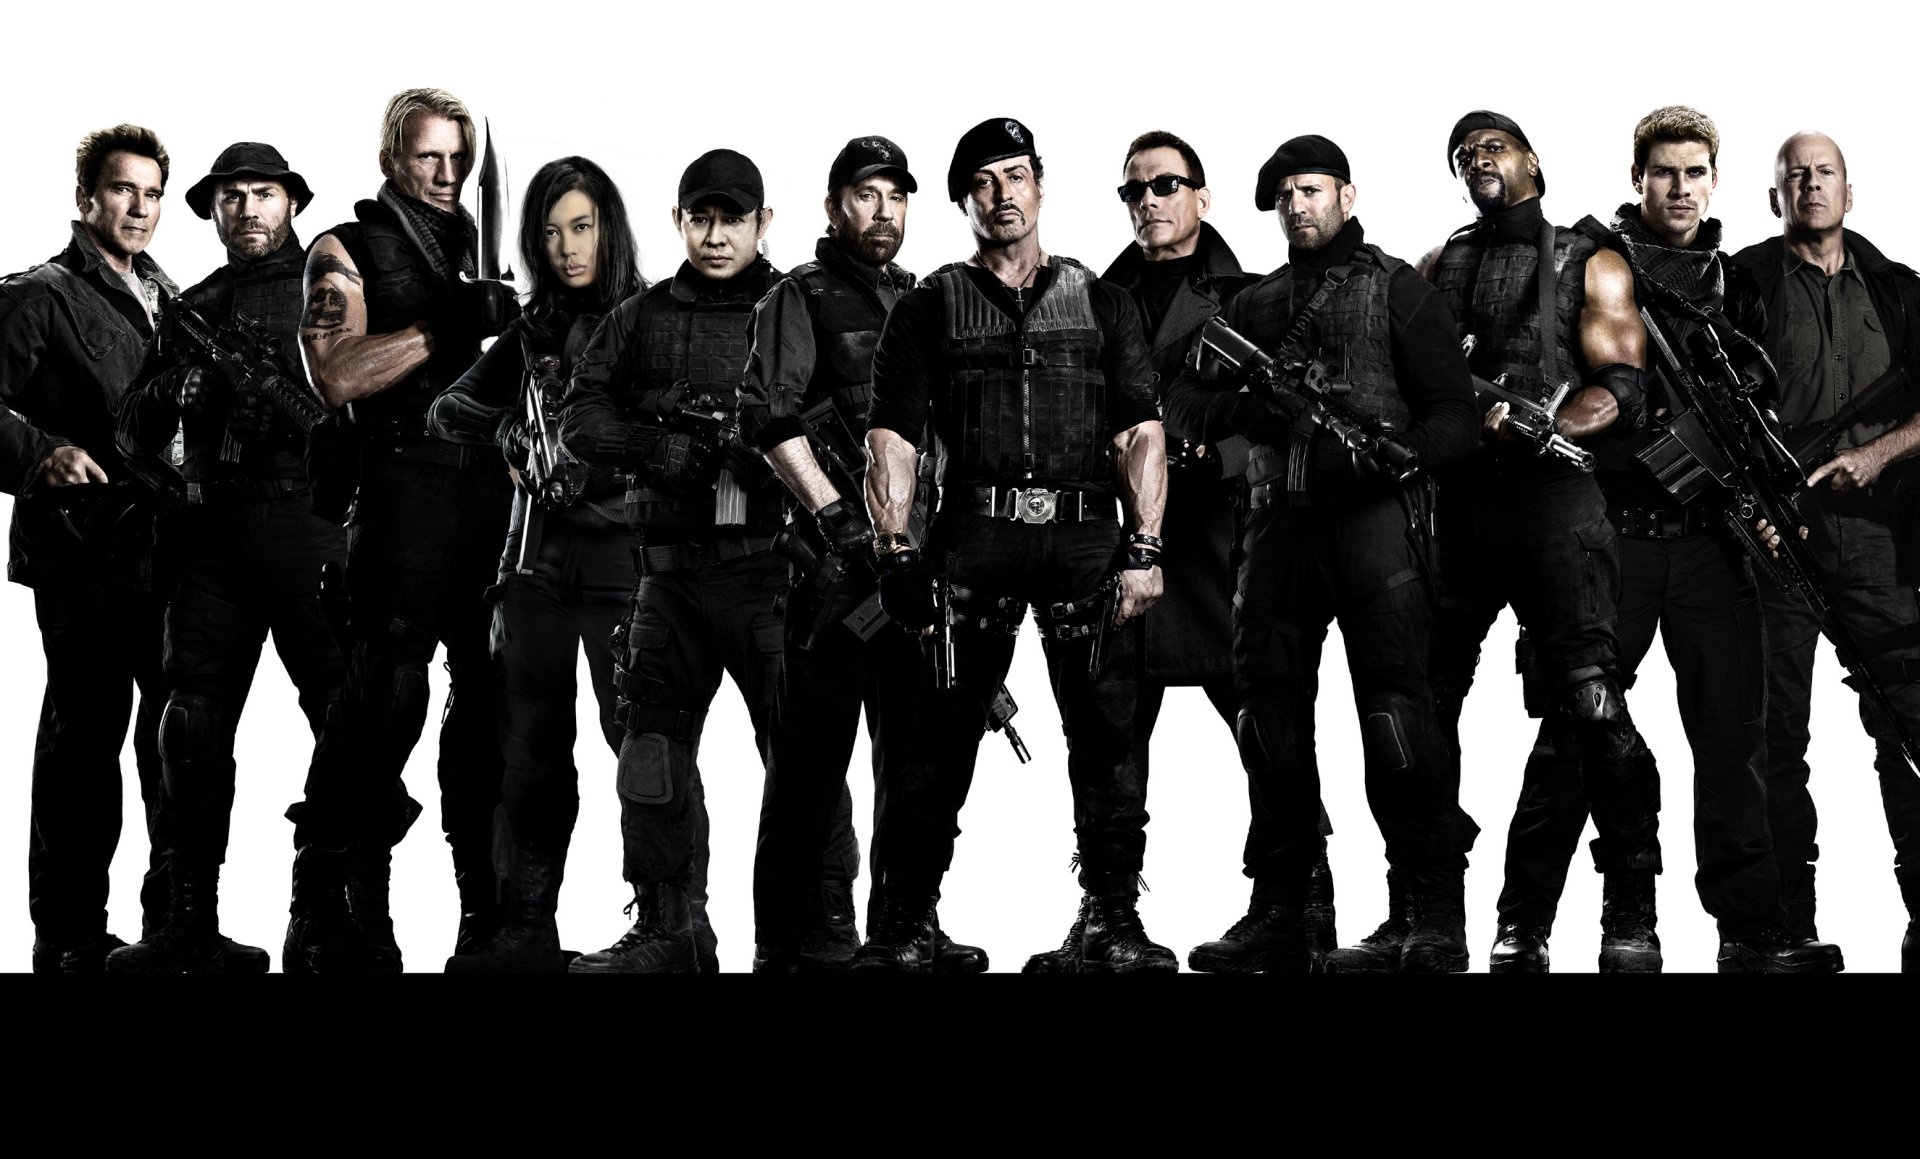 The Expendables 2 HD wallpapers, Background images, Explosive action, Iconic characters, 1920x1160 HD Desktop